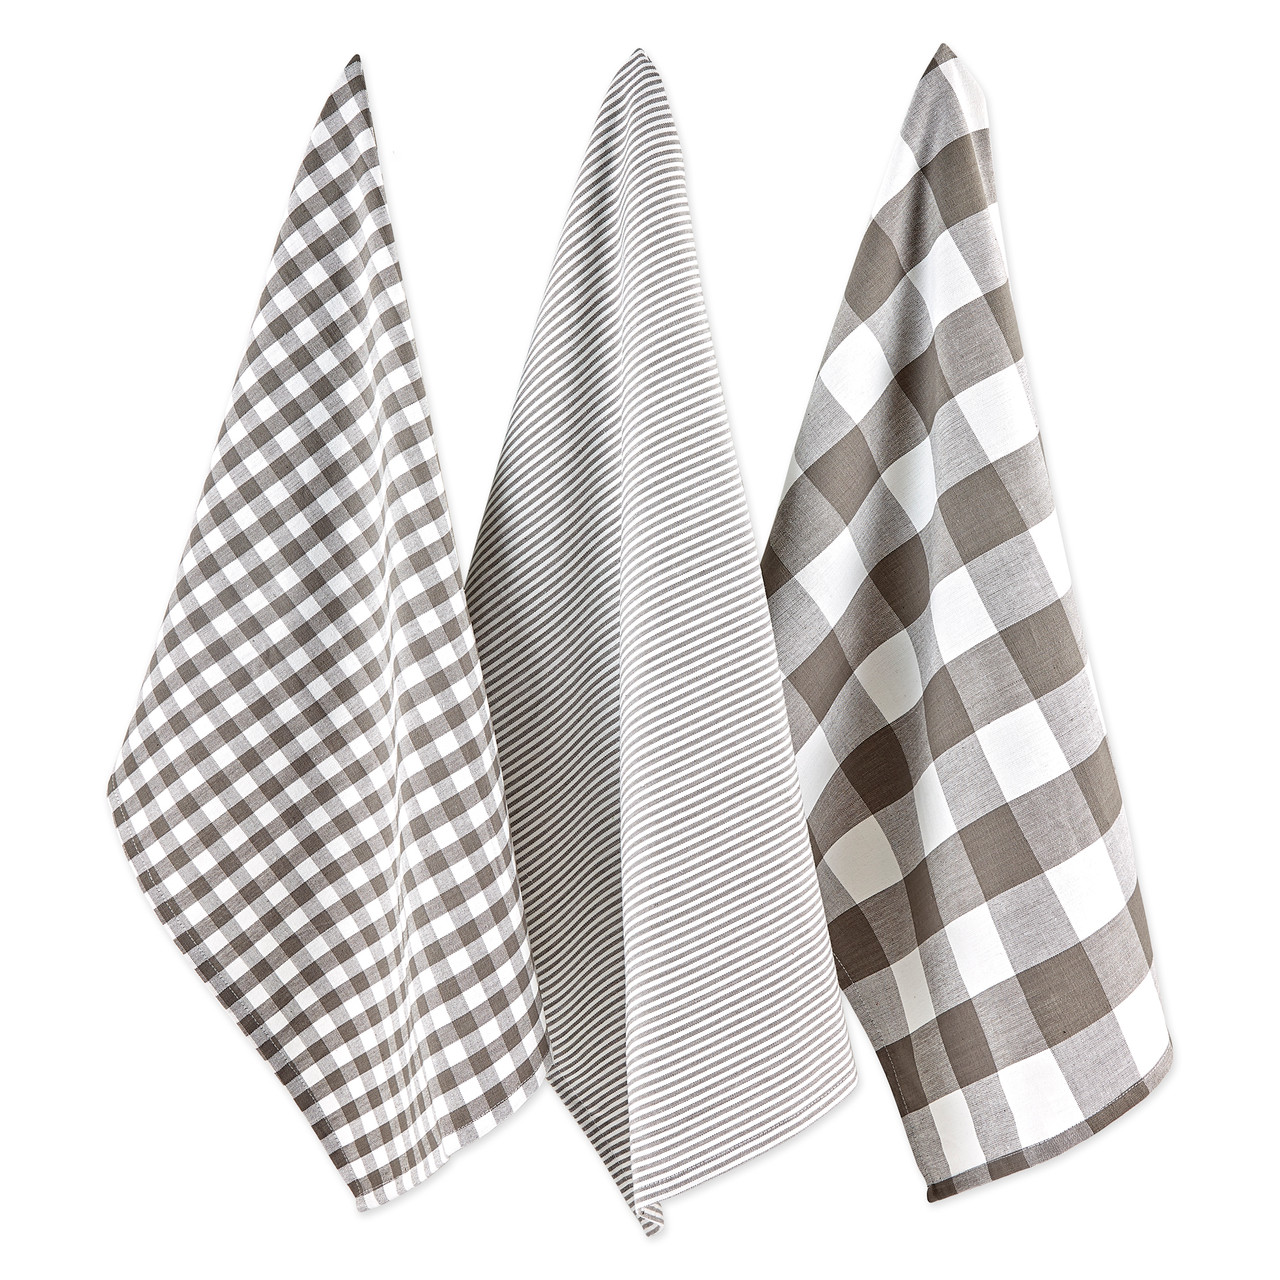 Dish Cloths for Washing Dishes Gray Kitchen Cloths Cleaning Cloths 12 inchx12 inch - 4 Pack